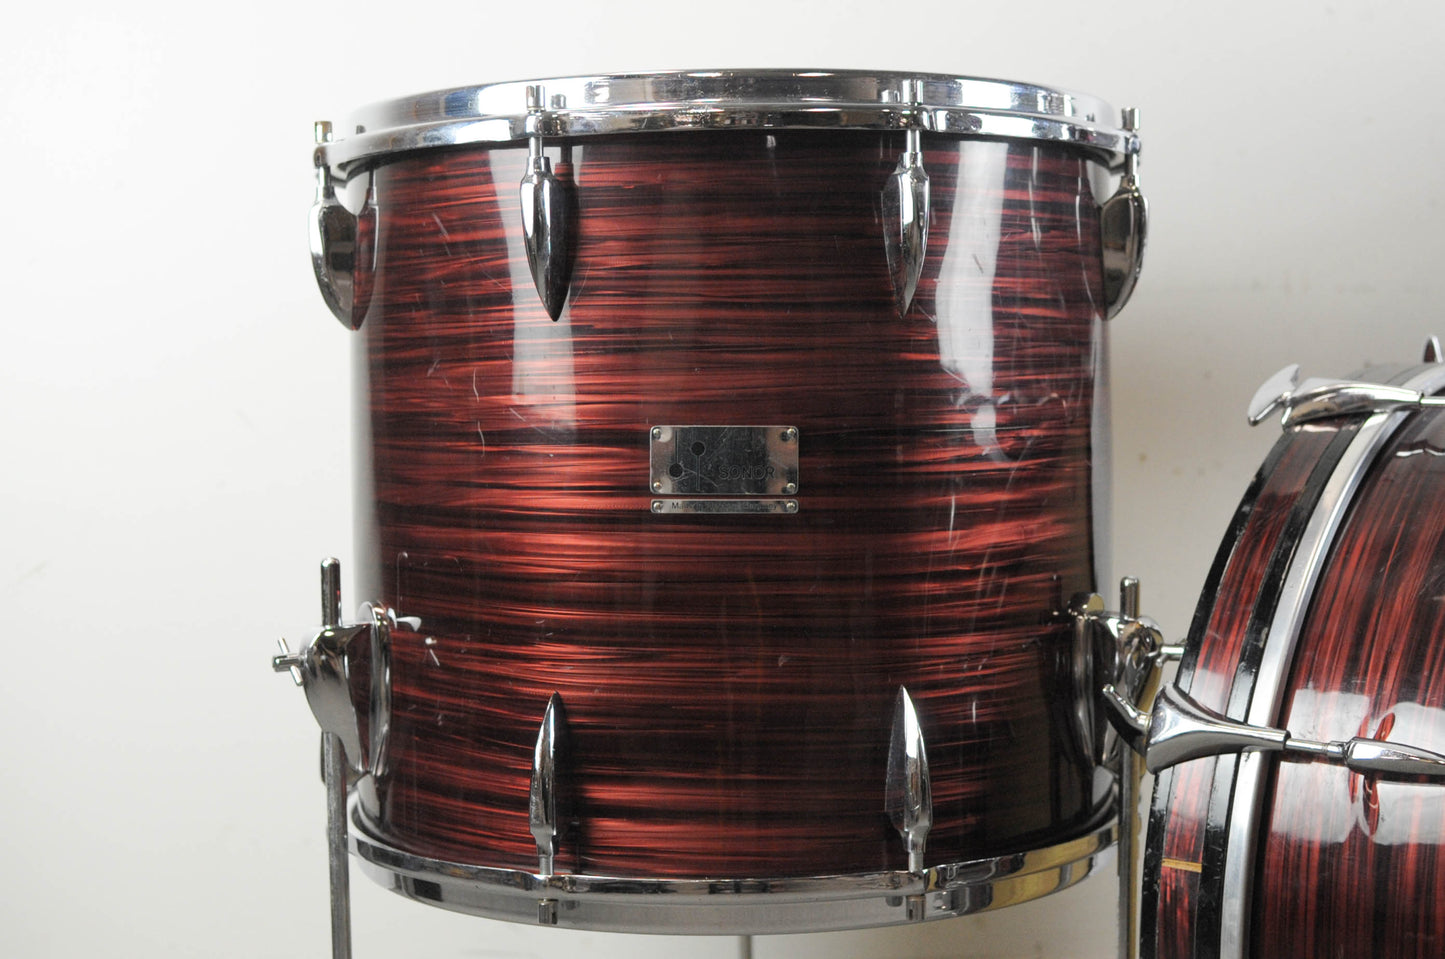 1960s Sonor "K-180" Red Marble Drum Set